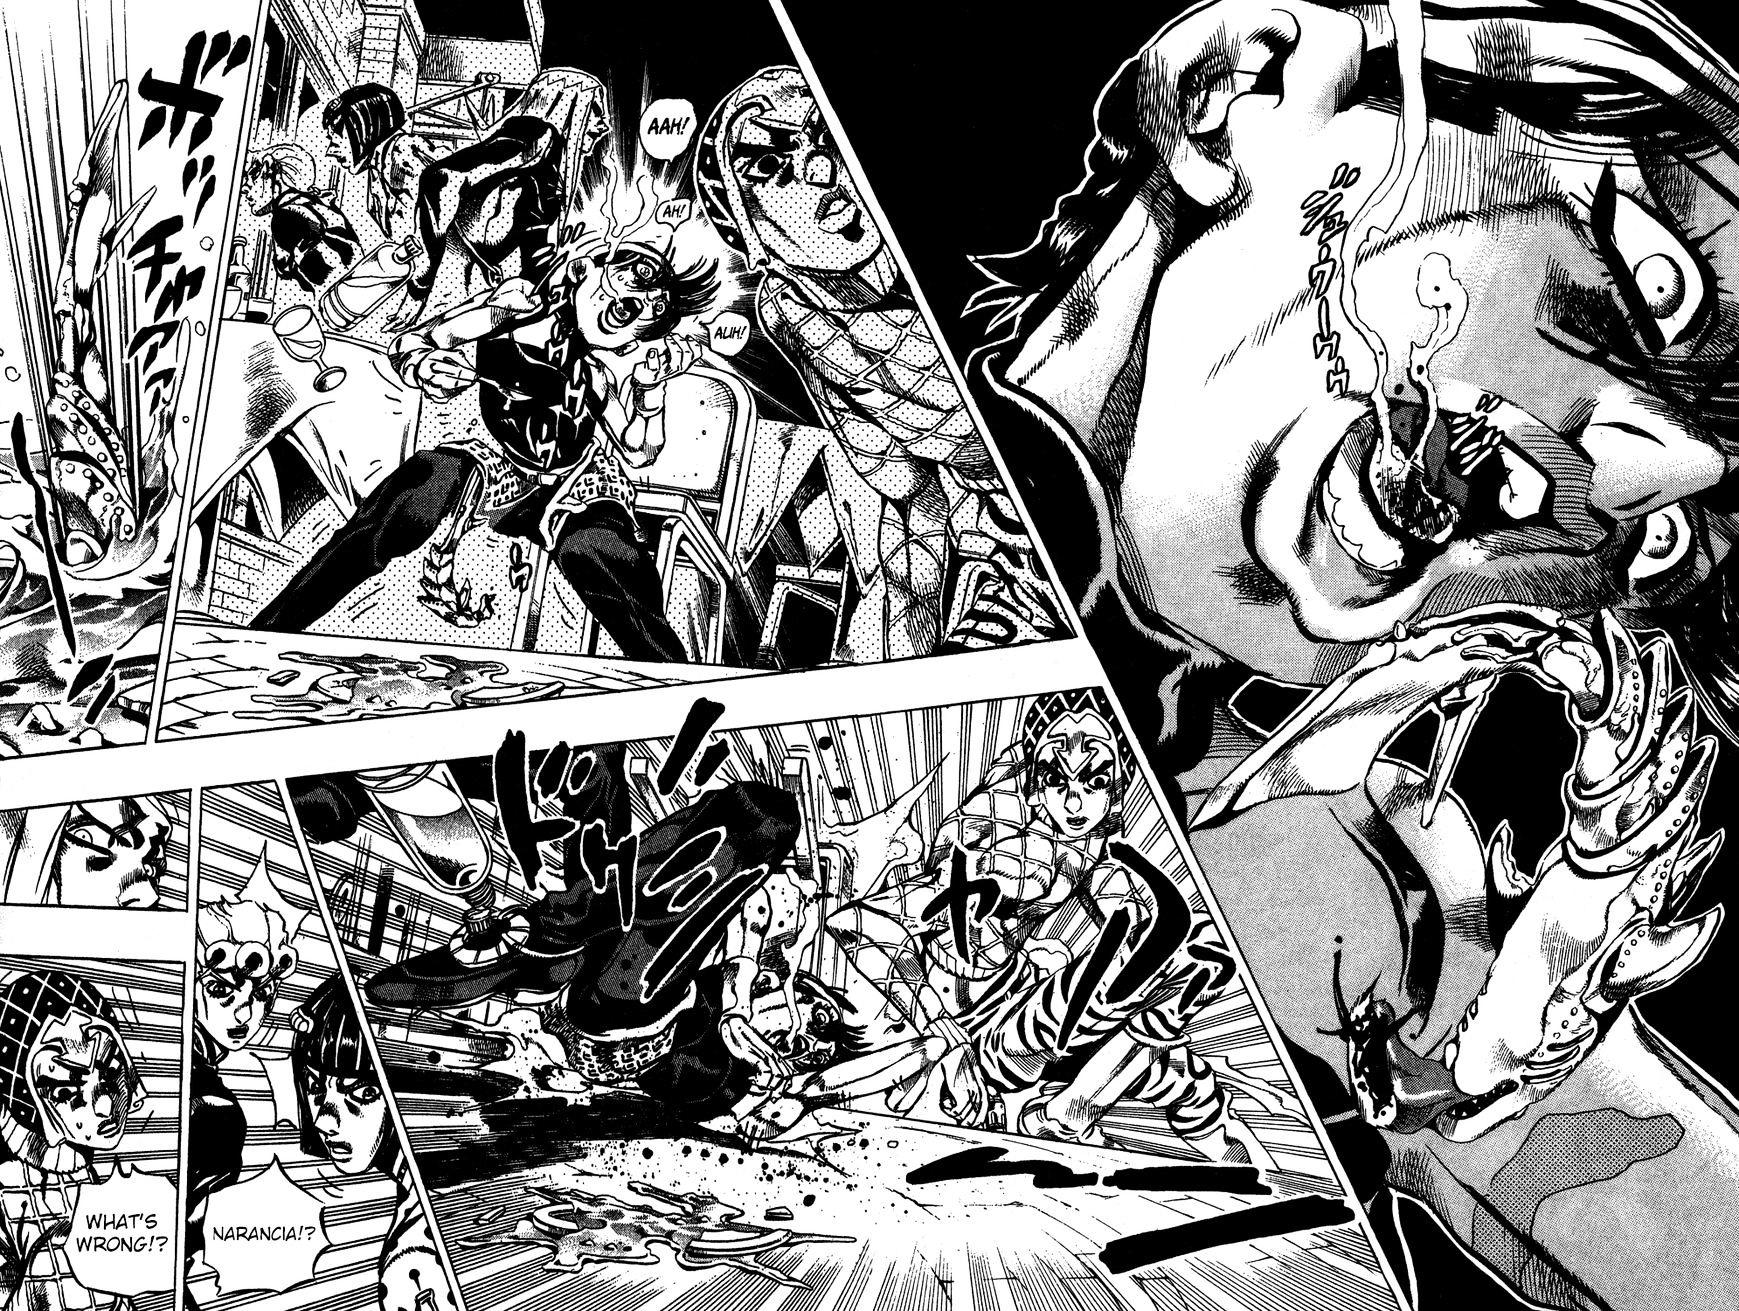 Jojo's Bizarre Adventure Vol.56 Chapter 525 : Clash And Taking Head - Part 1 page 6 - 